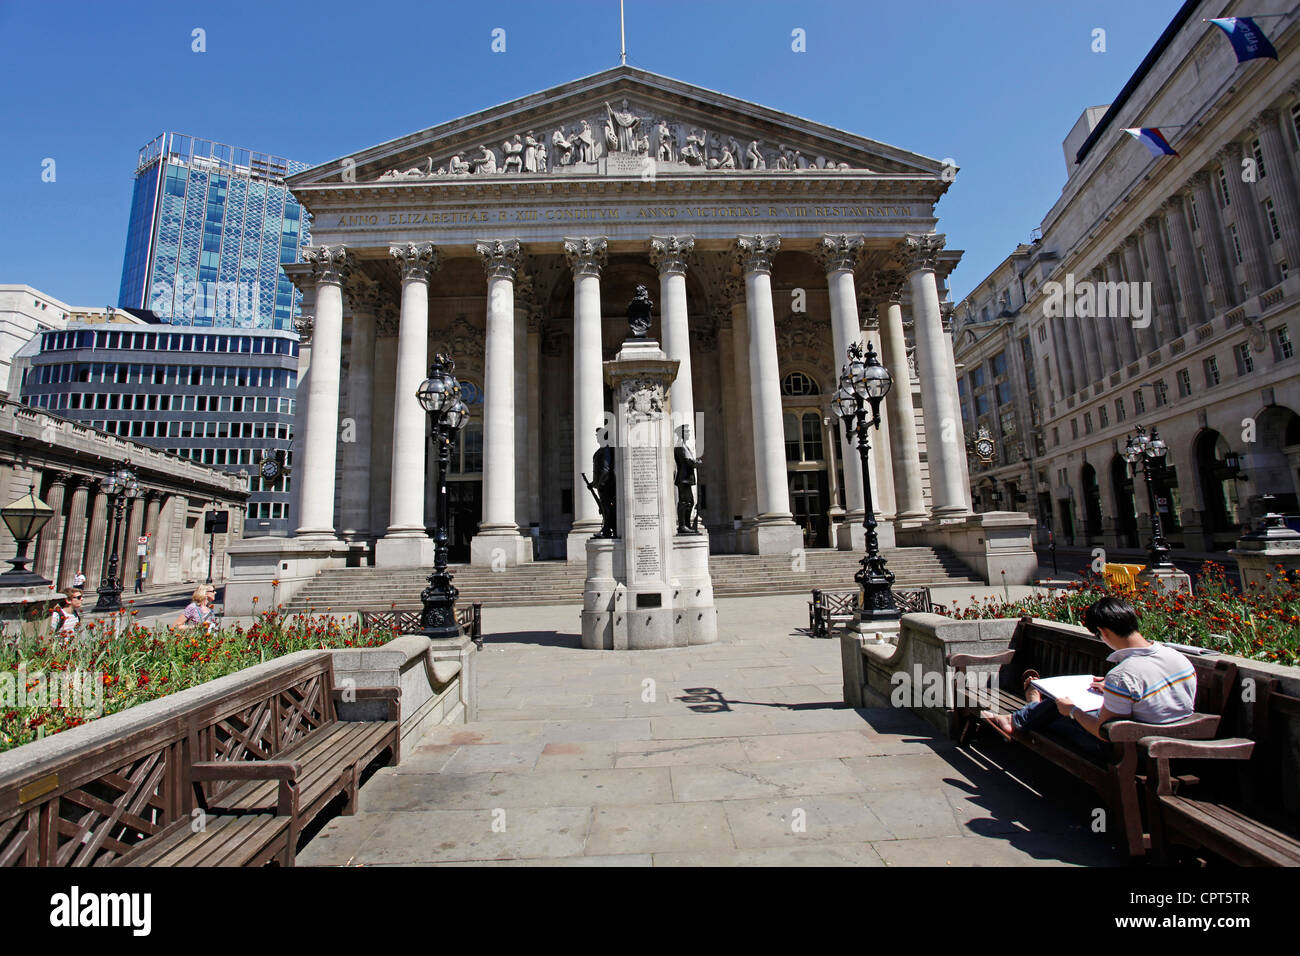 The Royal Exchange in the City, London, England Stock Photo